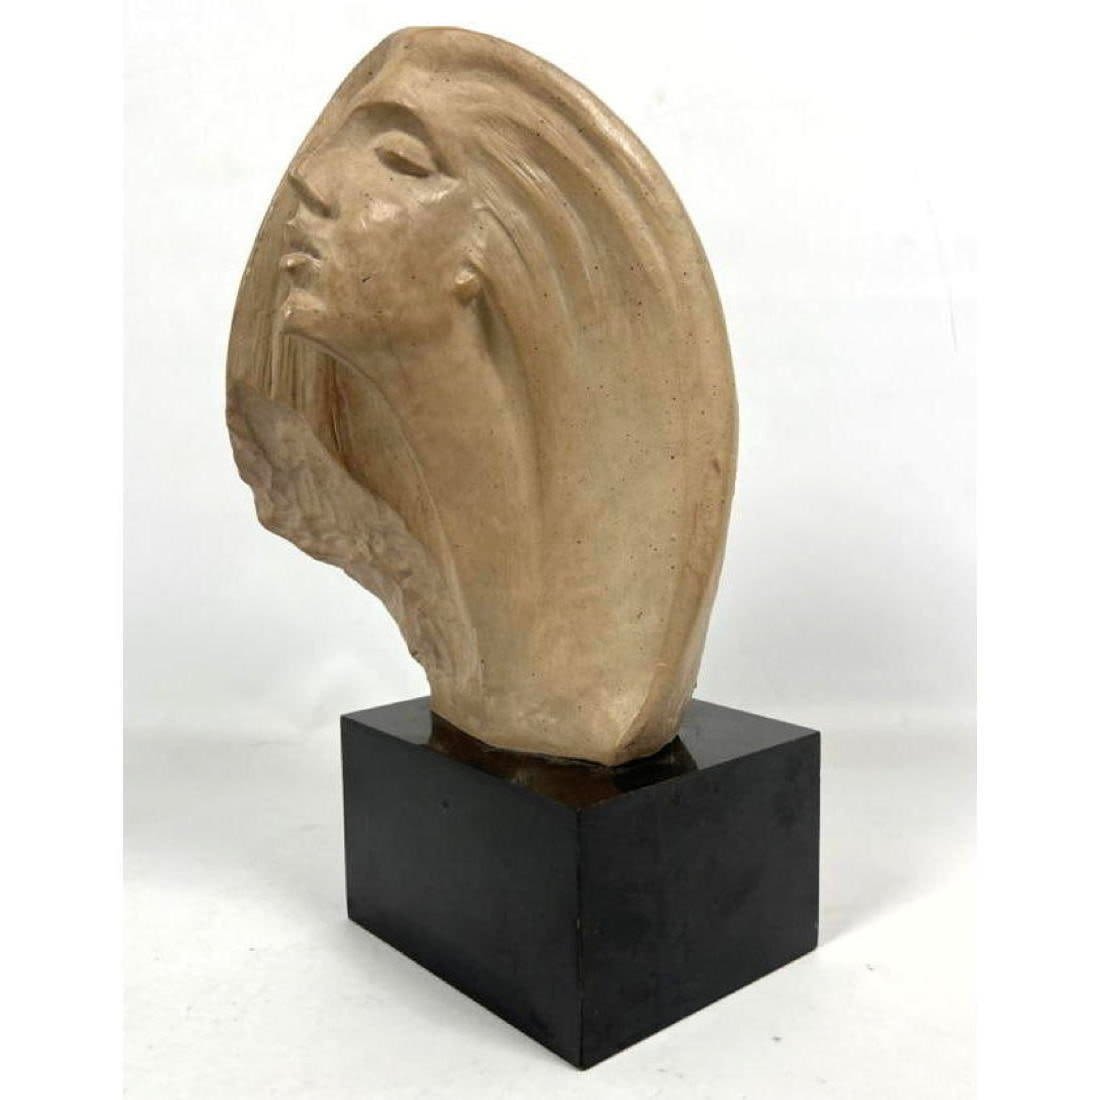 AUSTIN PRODUCTS Modernist Bust 362a6f